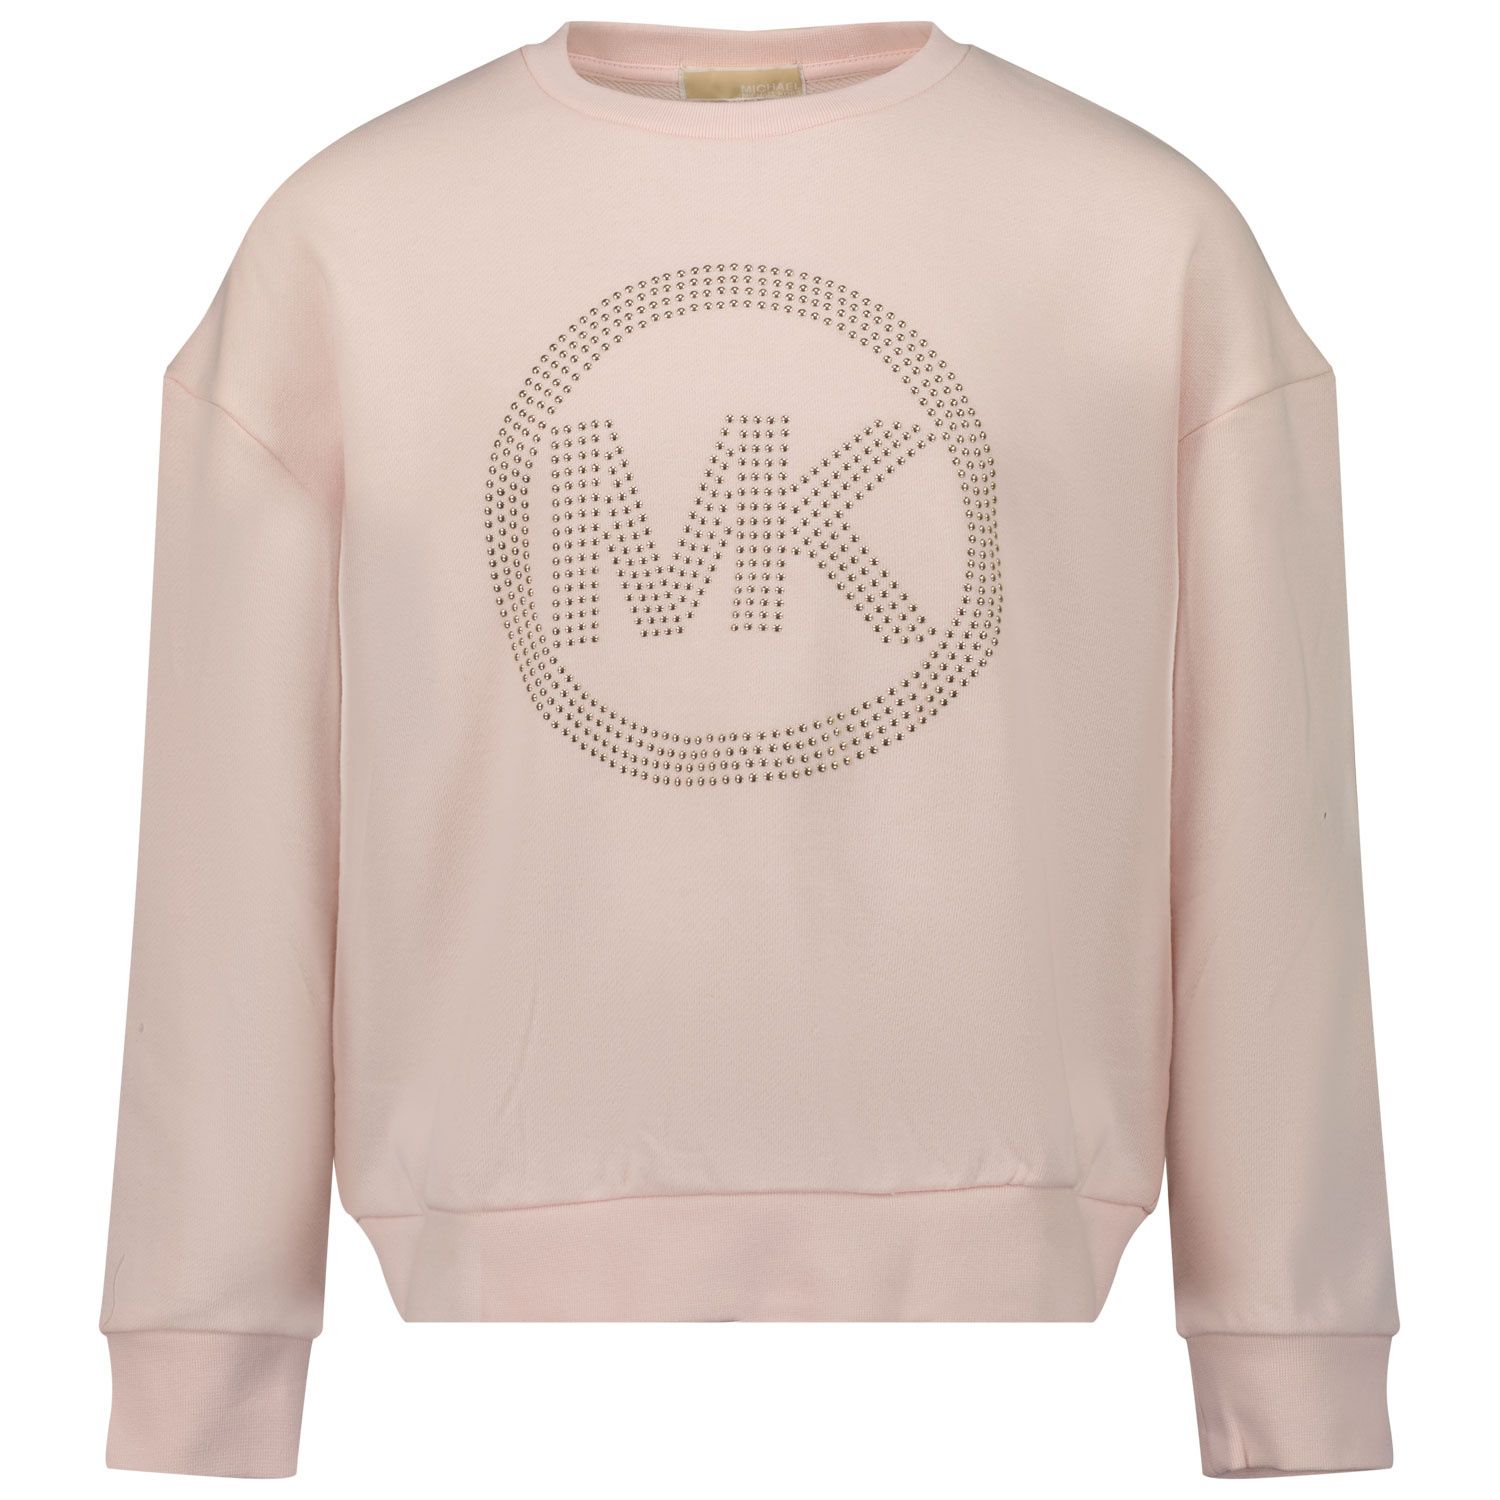 Picture of Michael Kors R15108 kids sweater light pink